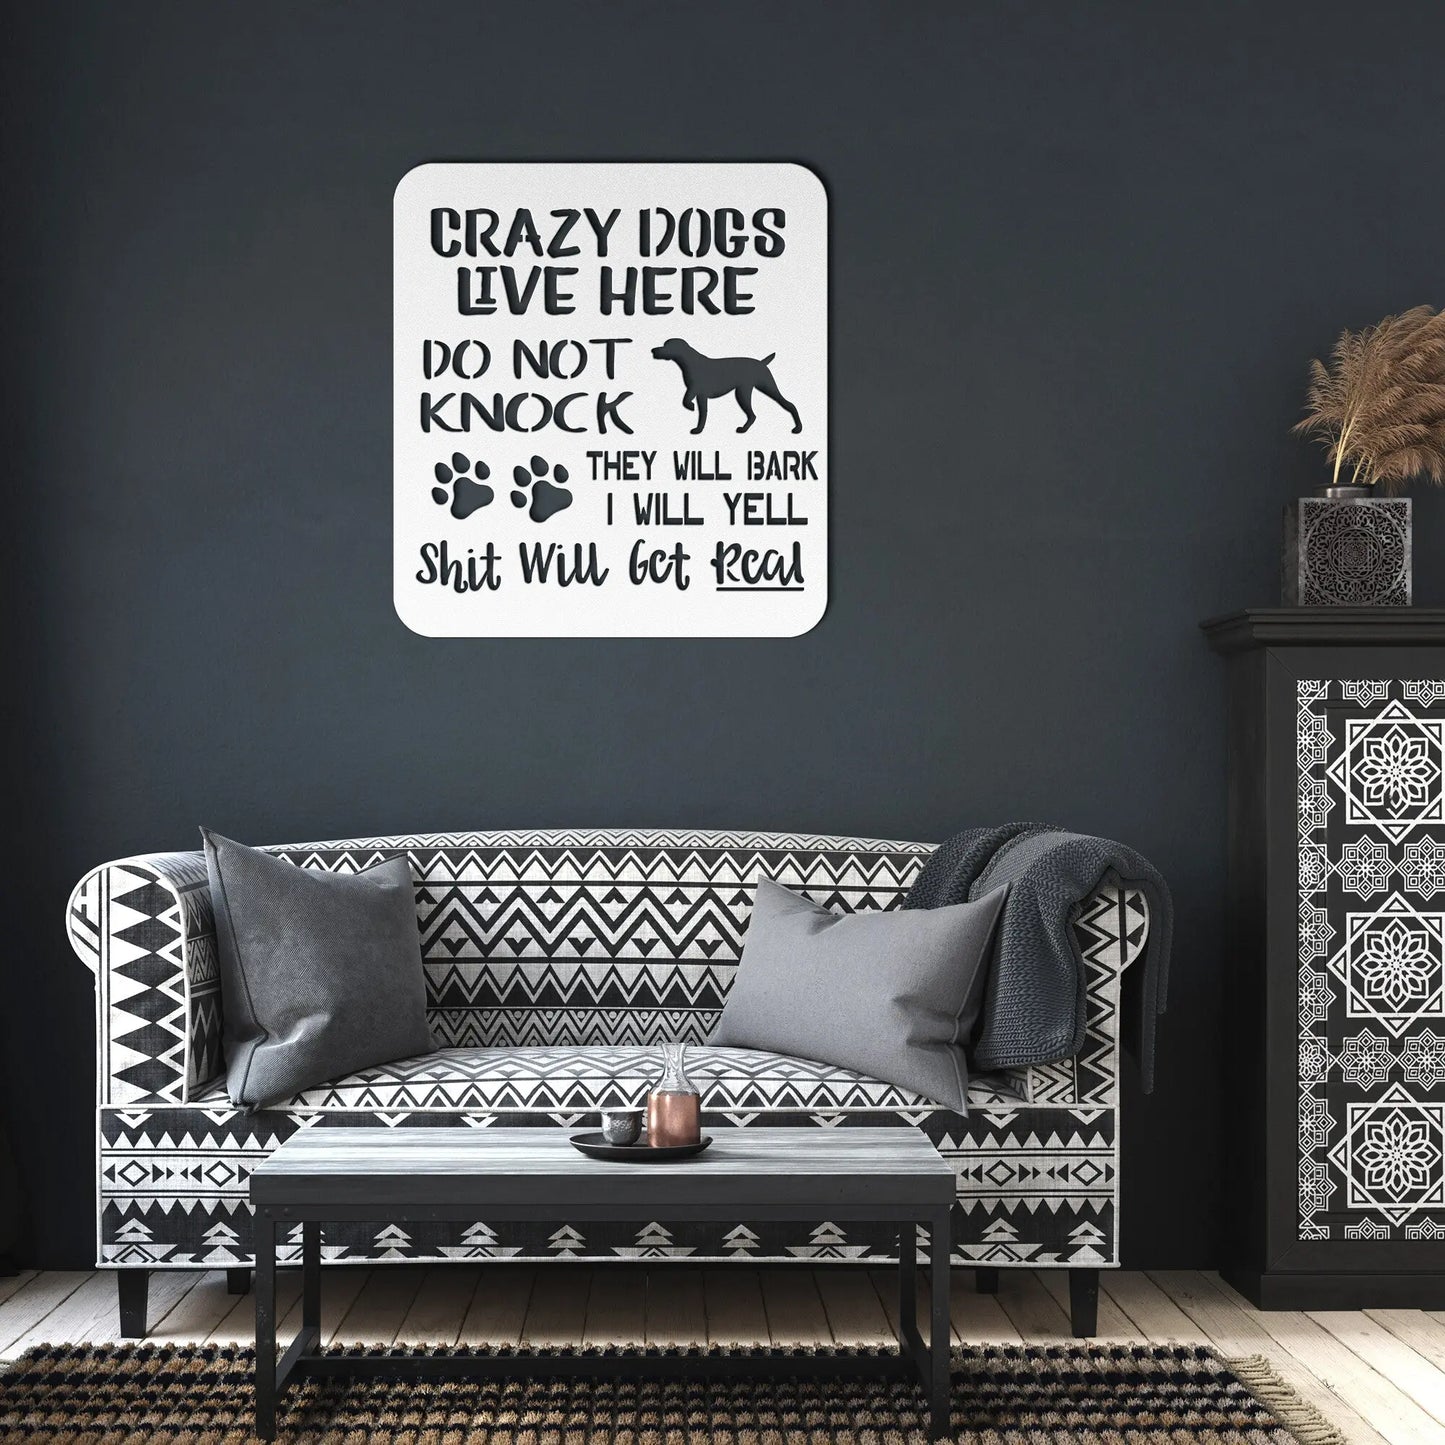 Wall Art Crazy Dogs Live Here Metal Sign; Wall Decor for Home and Office teelaunch